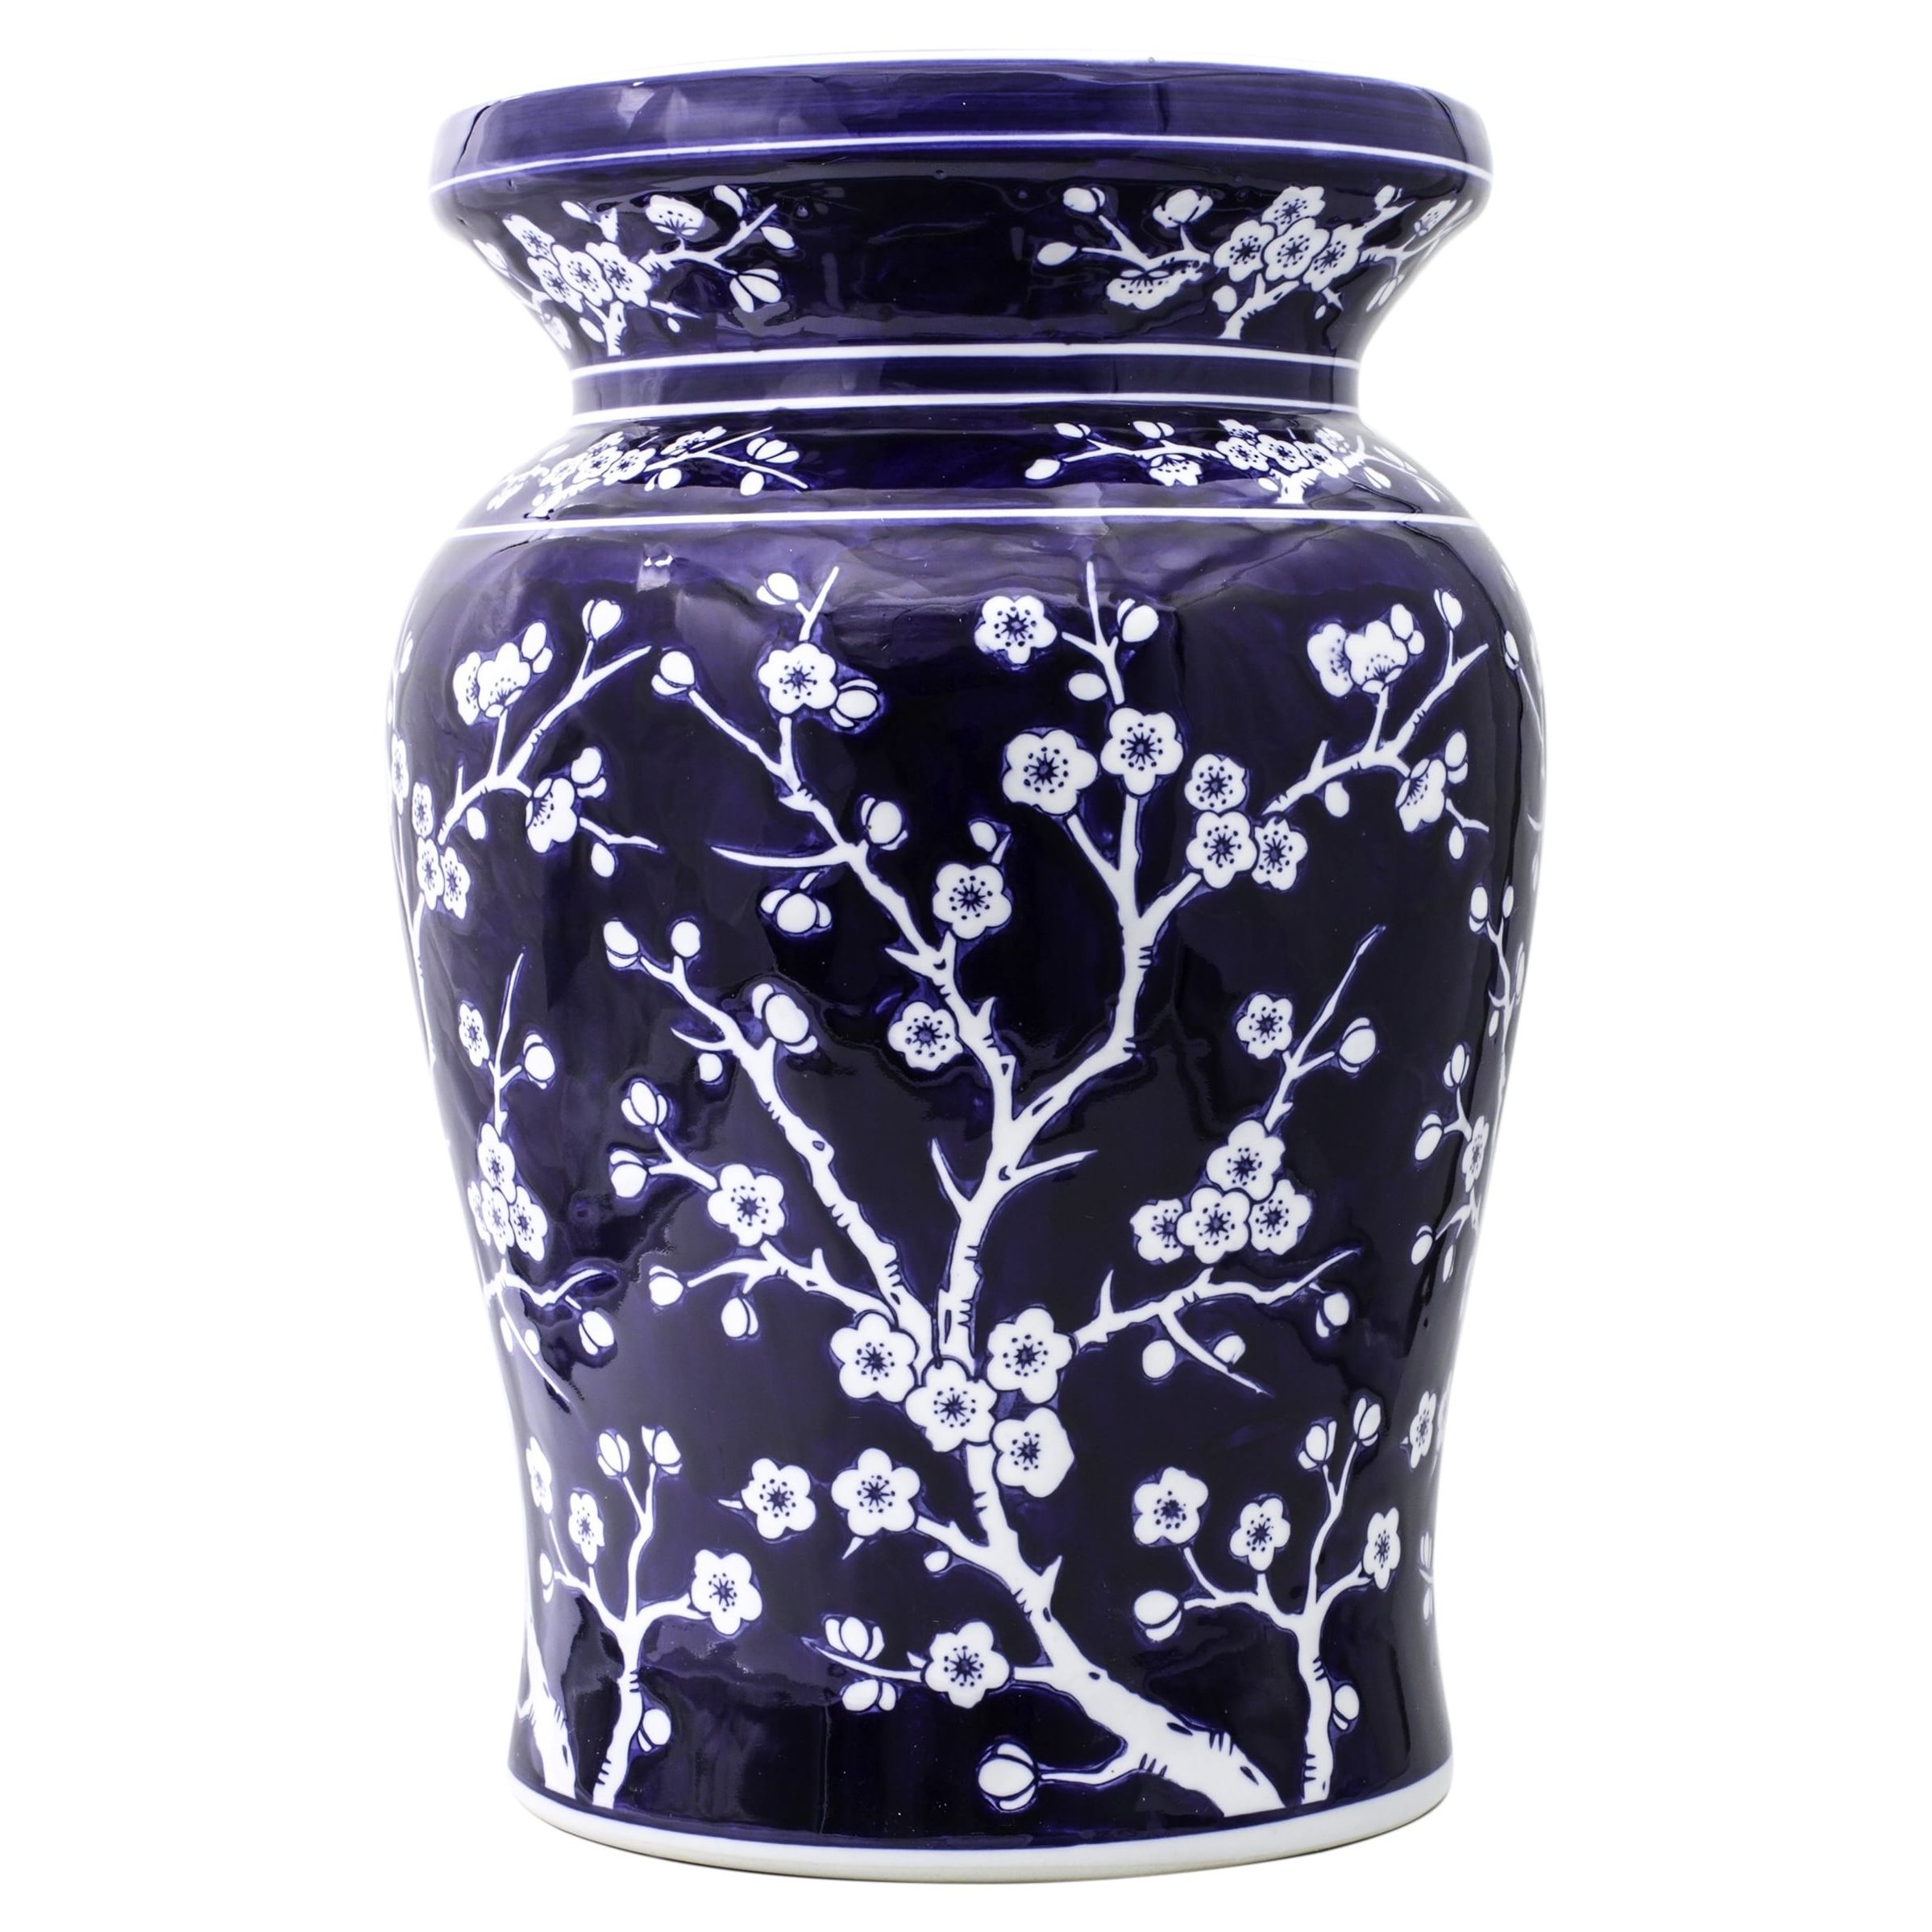 Most Current Claybarn Blue Garden Cobalt Cherry Blossom Podium Stool Within Holbæk Garden Stools (View 14 of 30)